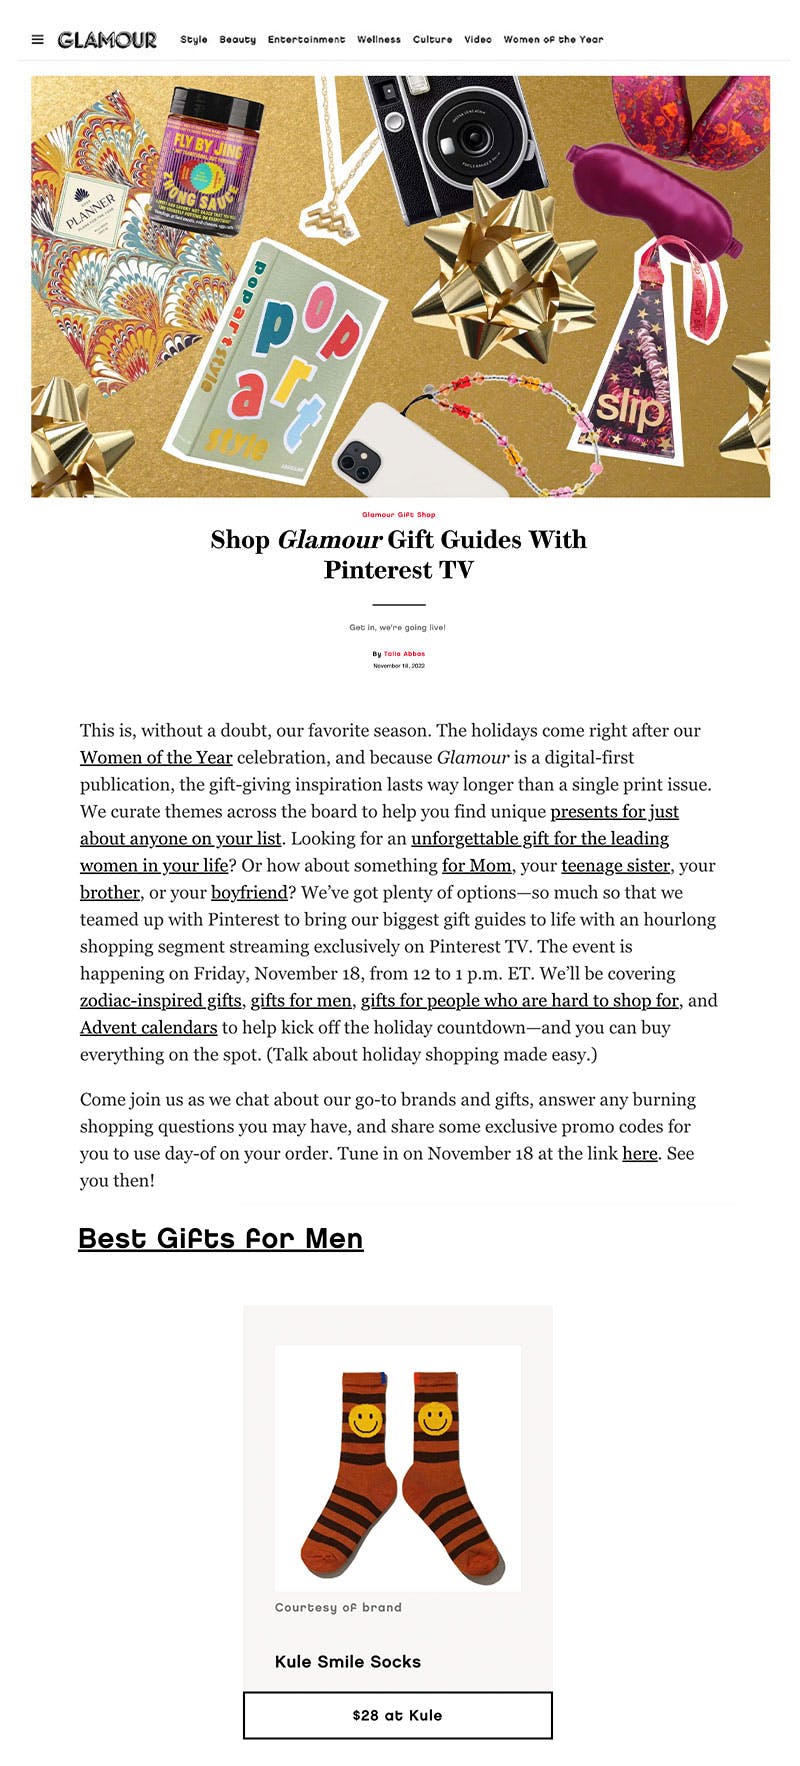 Glamour featuring KULE men's socks for holiday gifts 2022